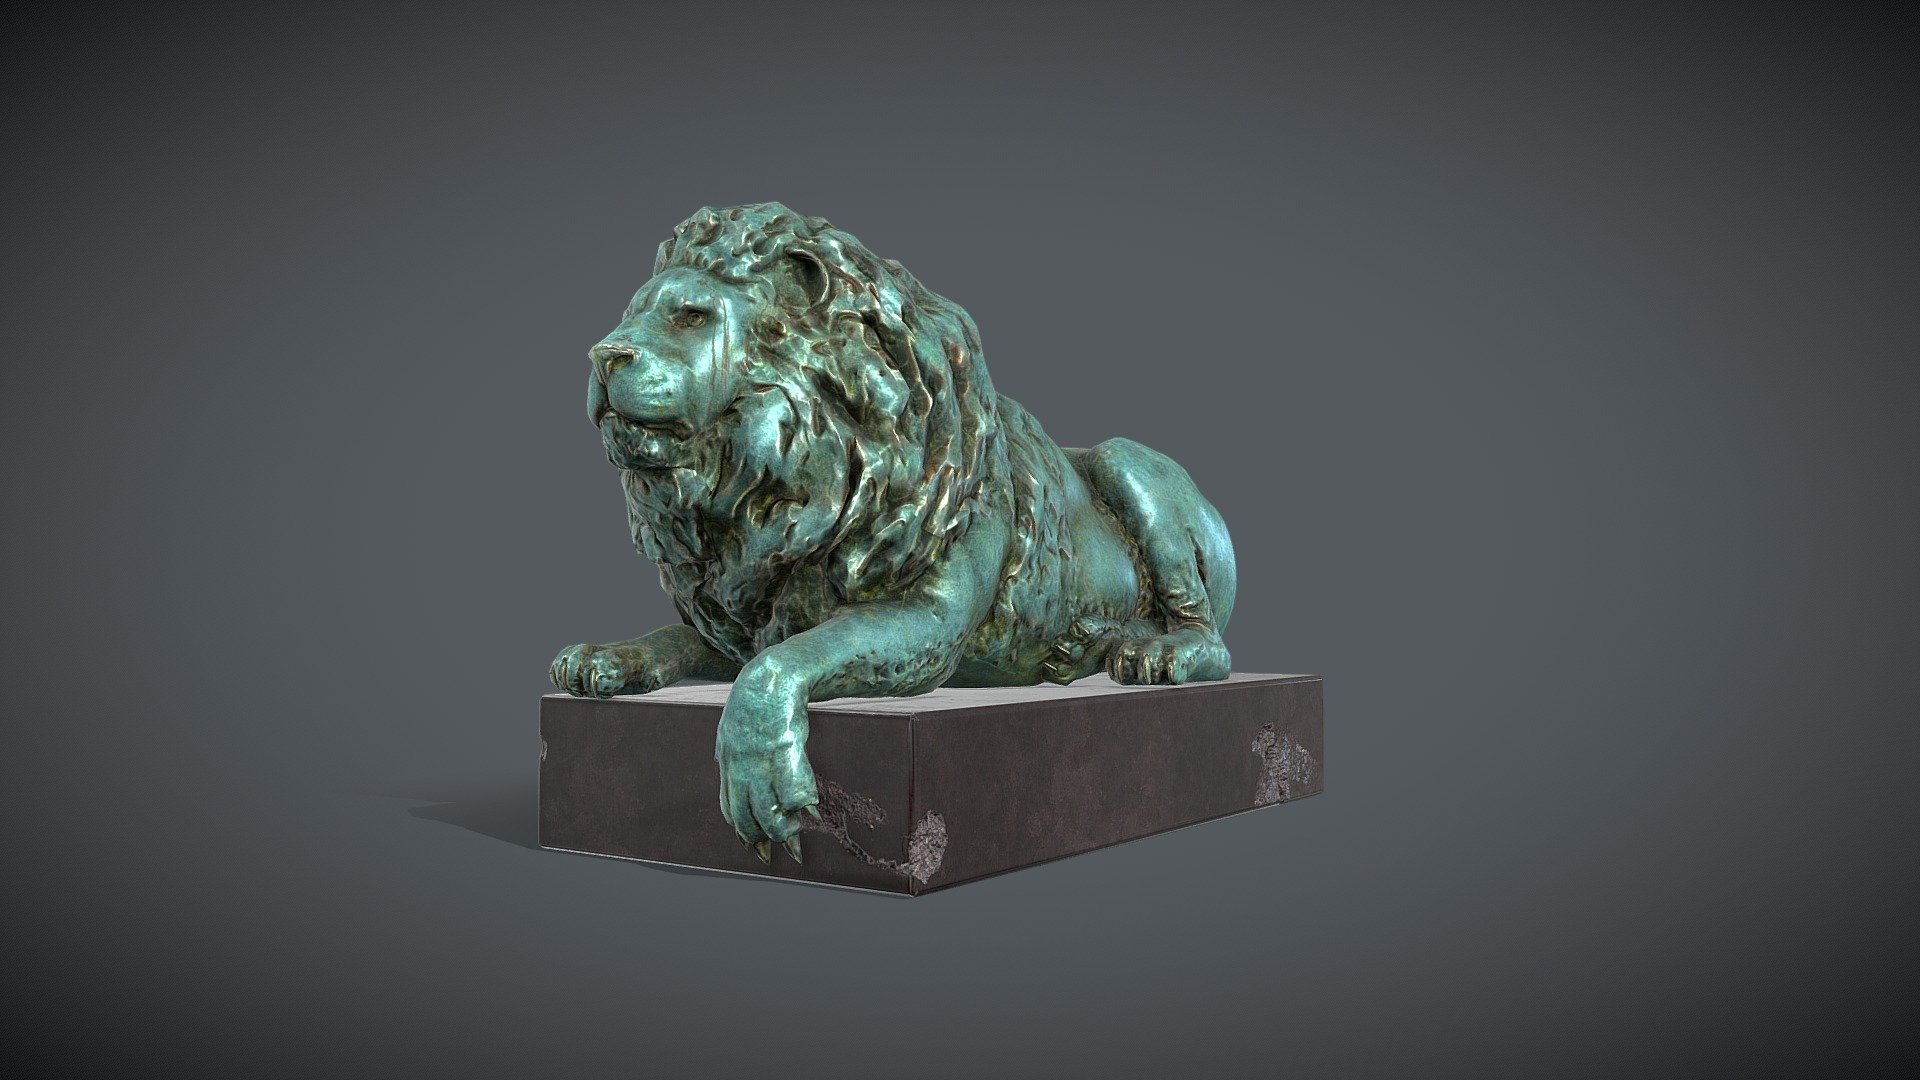 3d model of a bronze sculpture of a lying lion made for a city project in the Victorian style - Lion sculpture bronze - 3D model by Pavel Voloshin (@elcom) 3d model